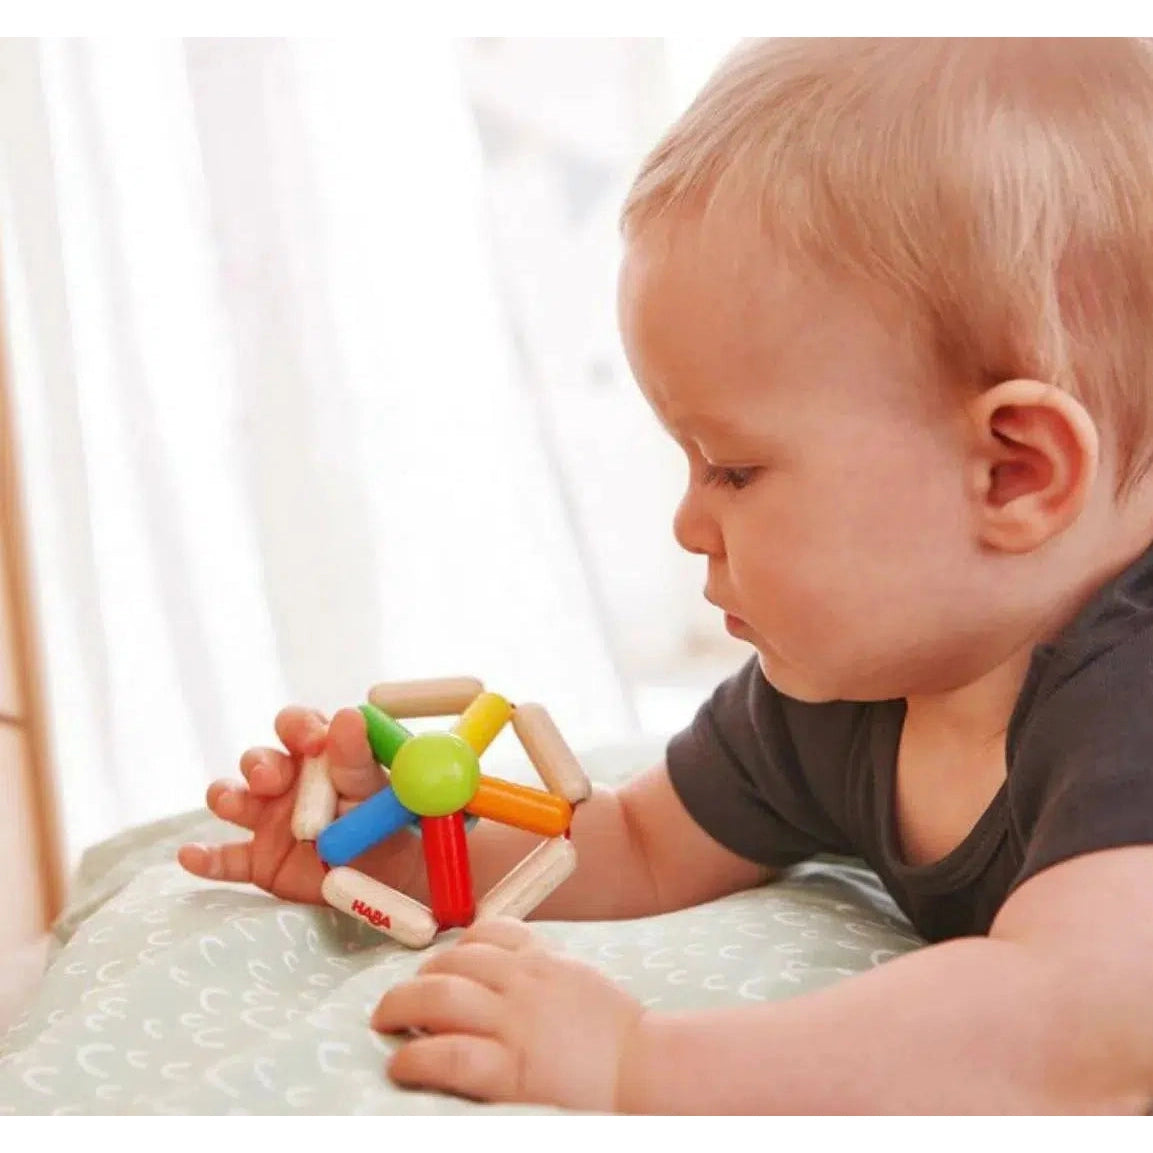 Front view of a baby holding and looking down at the Clutching Toy Color Carousel.